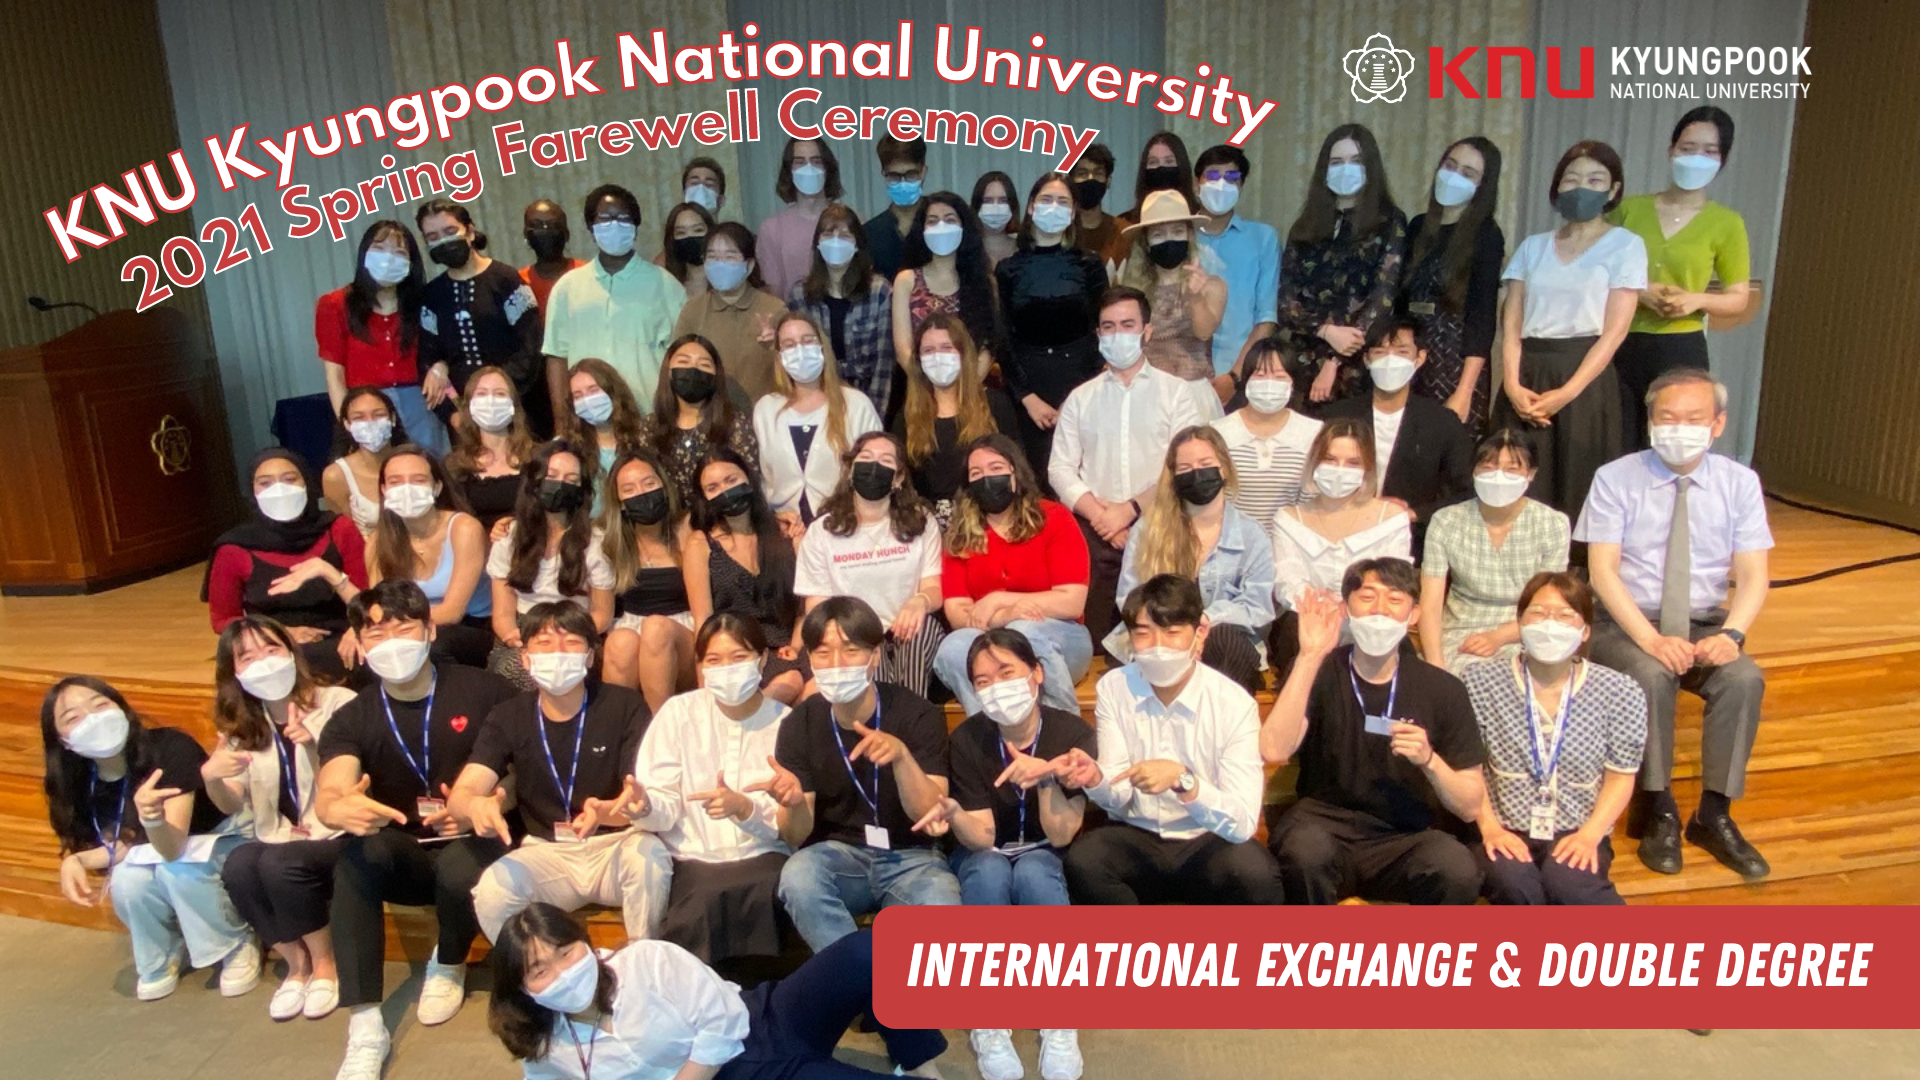 2021 Spring farewell ceremony for exchange and double degree students 관련 이미지입니다